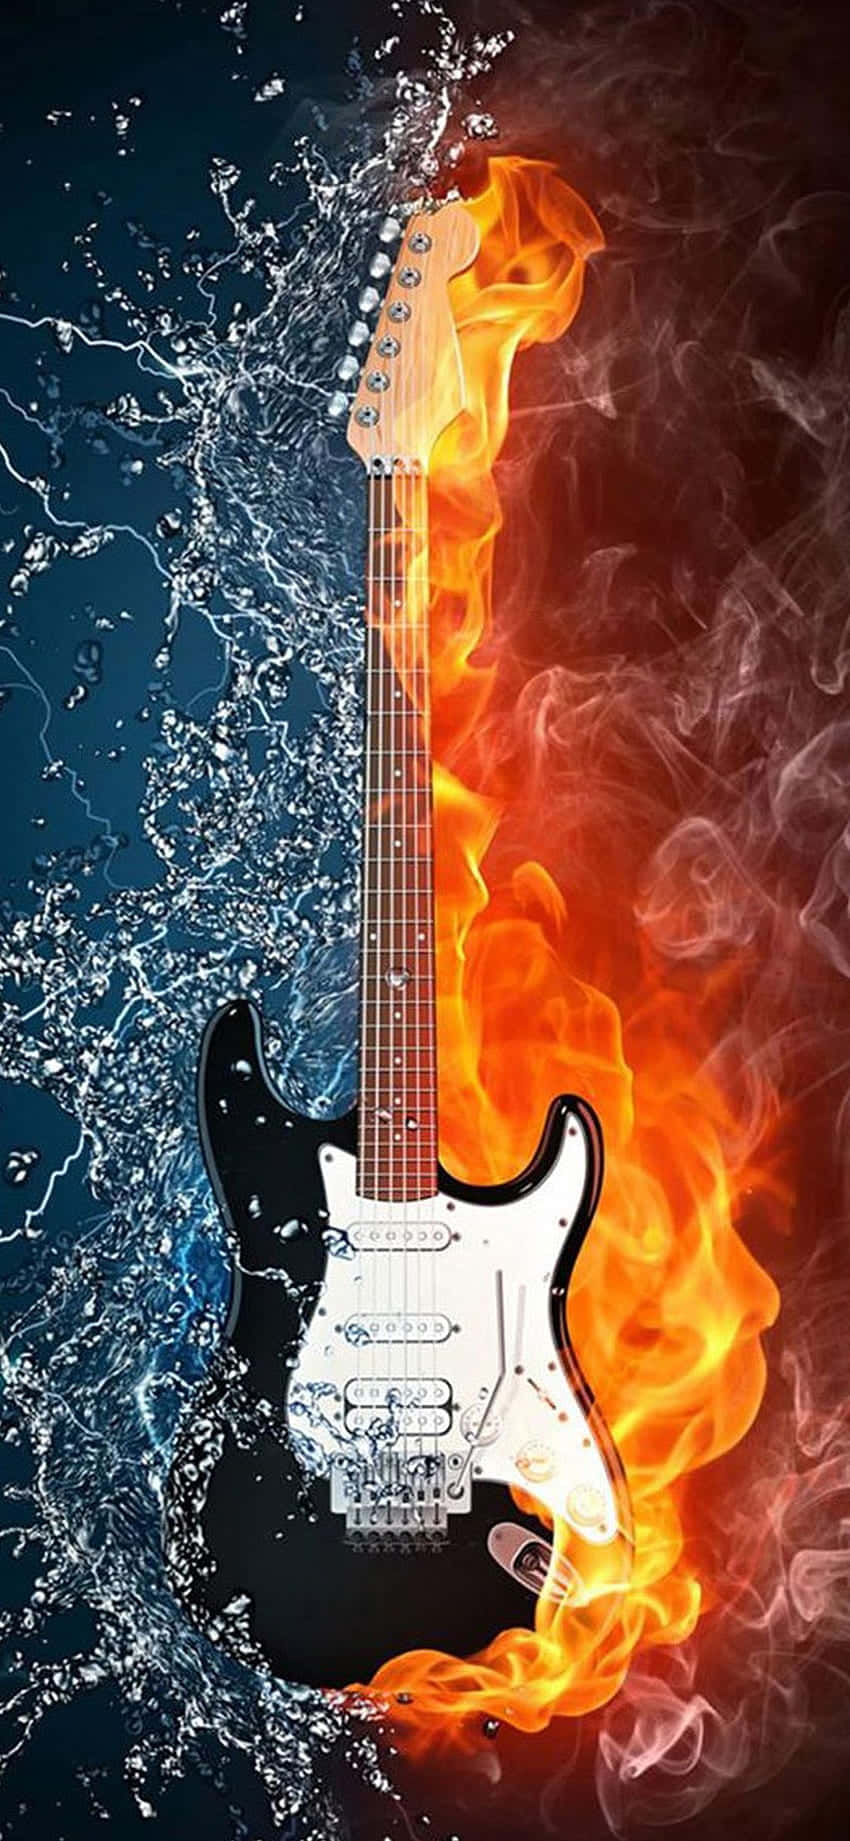 Apple Iphone X Guitar Fire Water Background